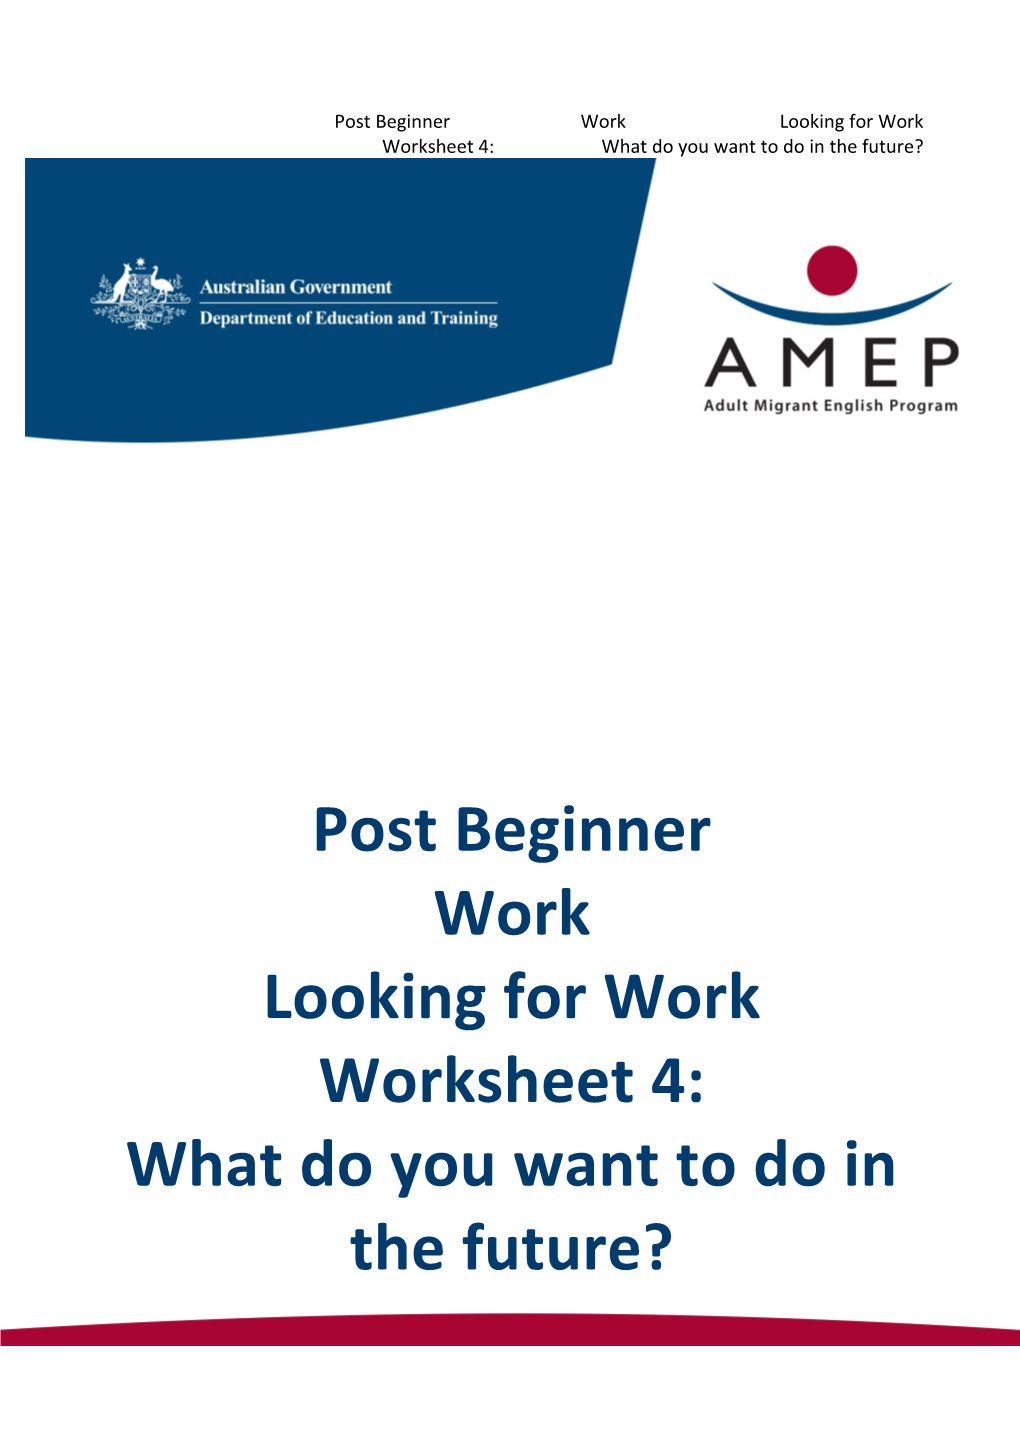 Post Beginner Work Looking for Work Worksheet 4: What Do You Want to Do in the Future?